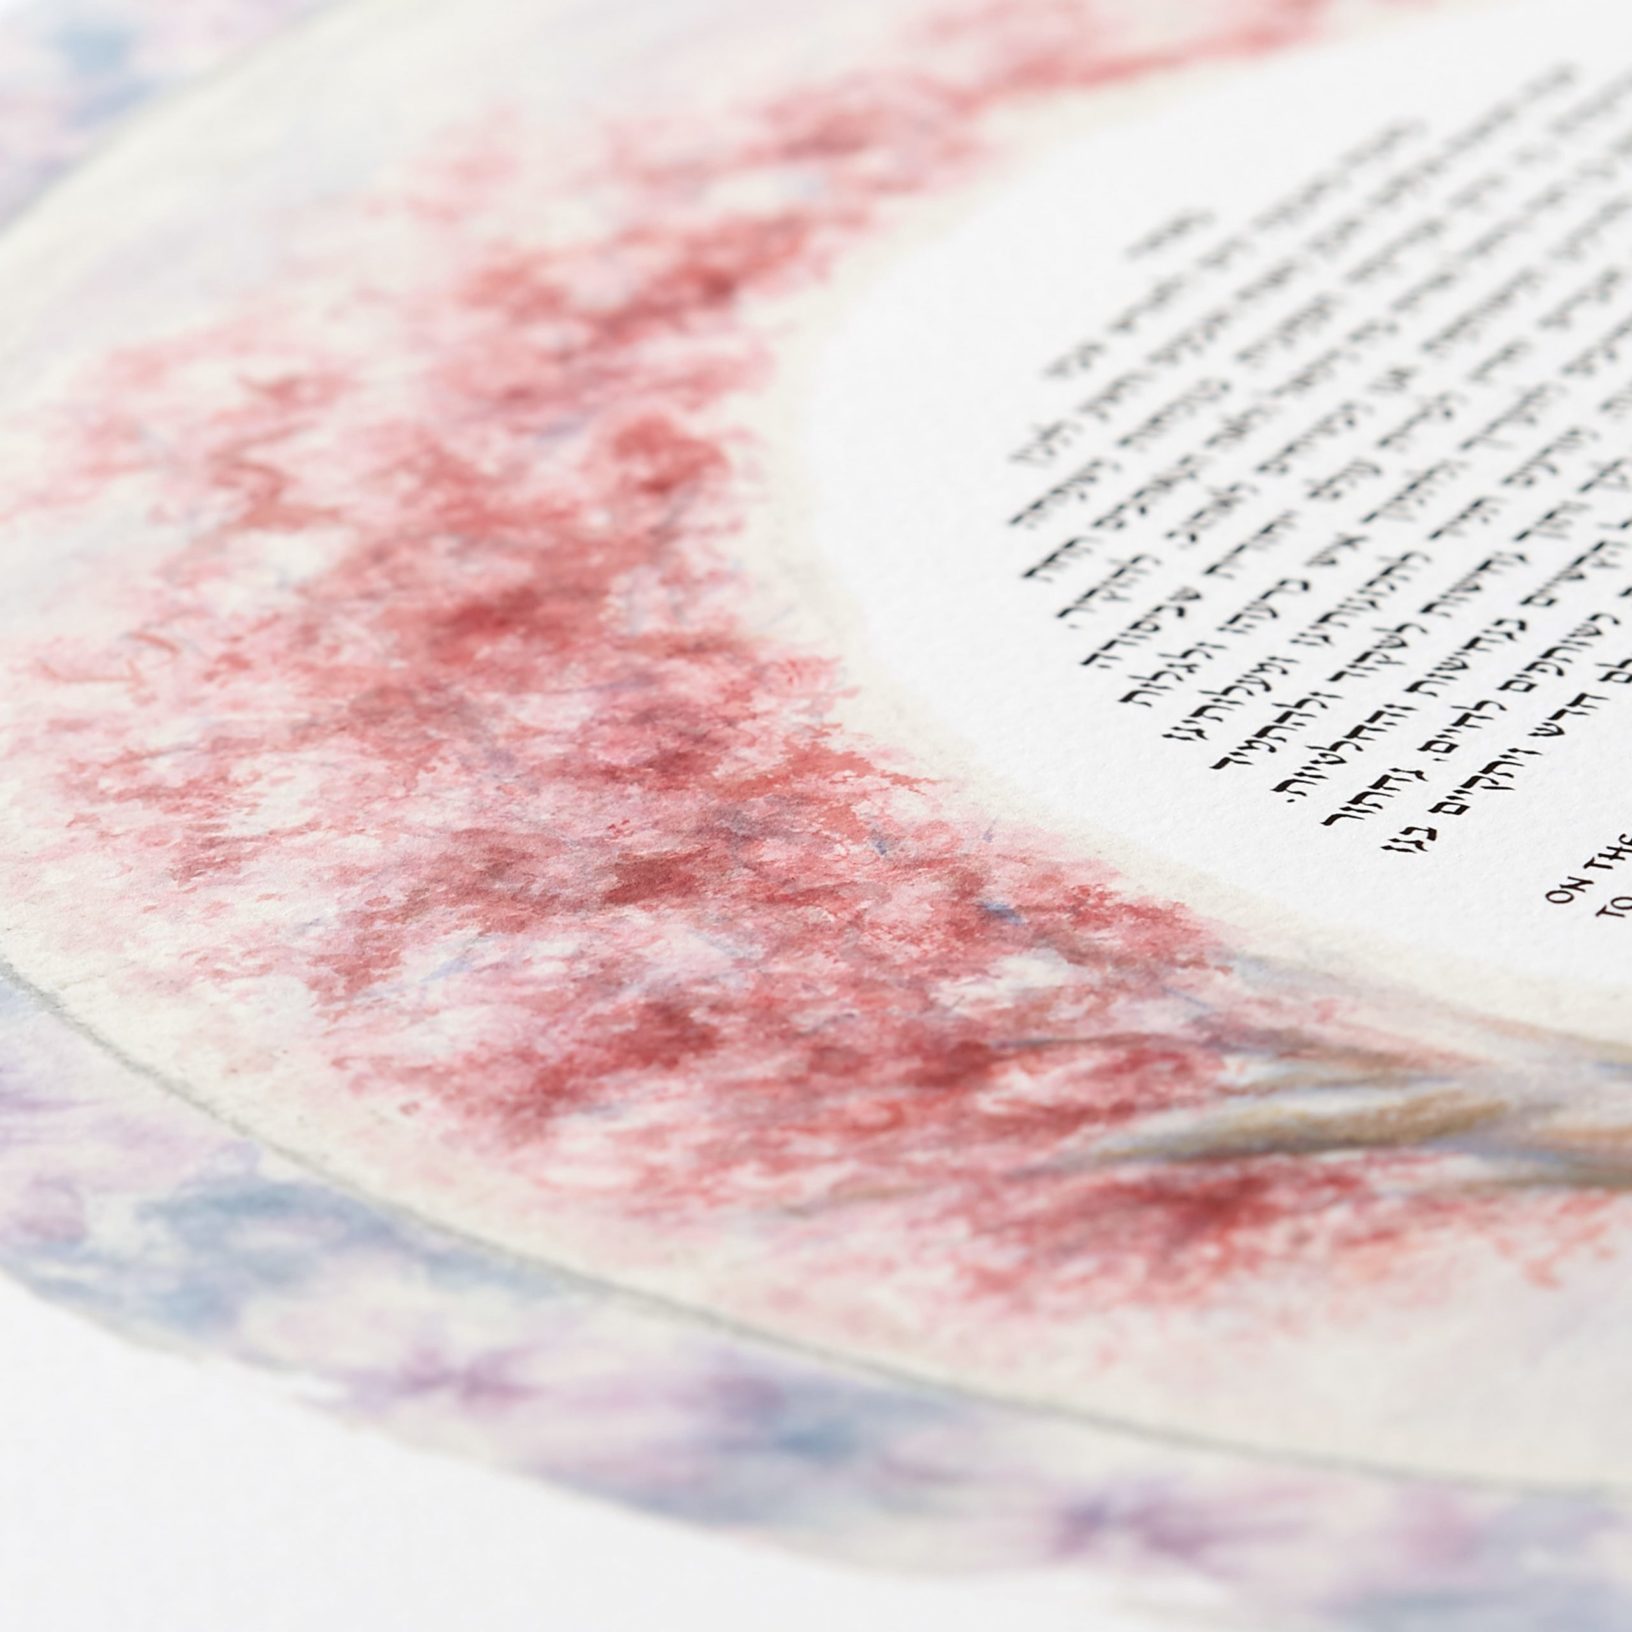 Japanese Spring Ketubah Store by Tziona Brauner